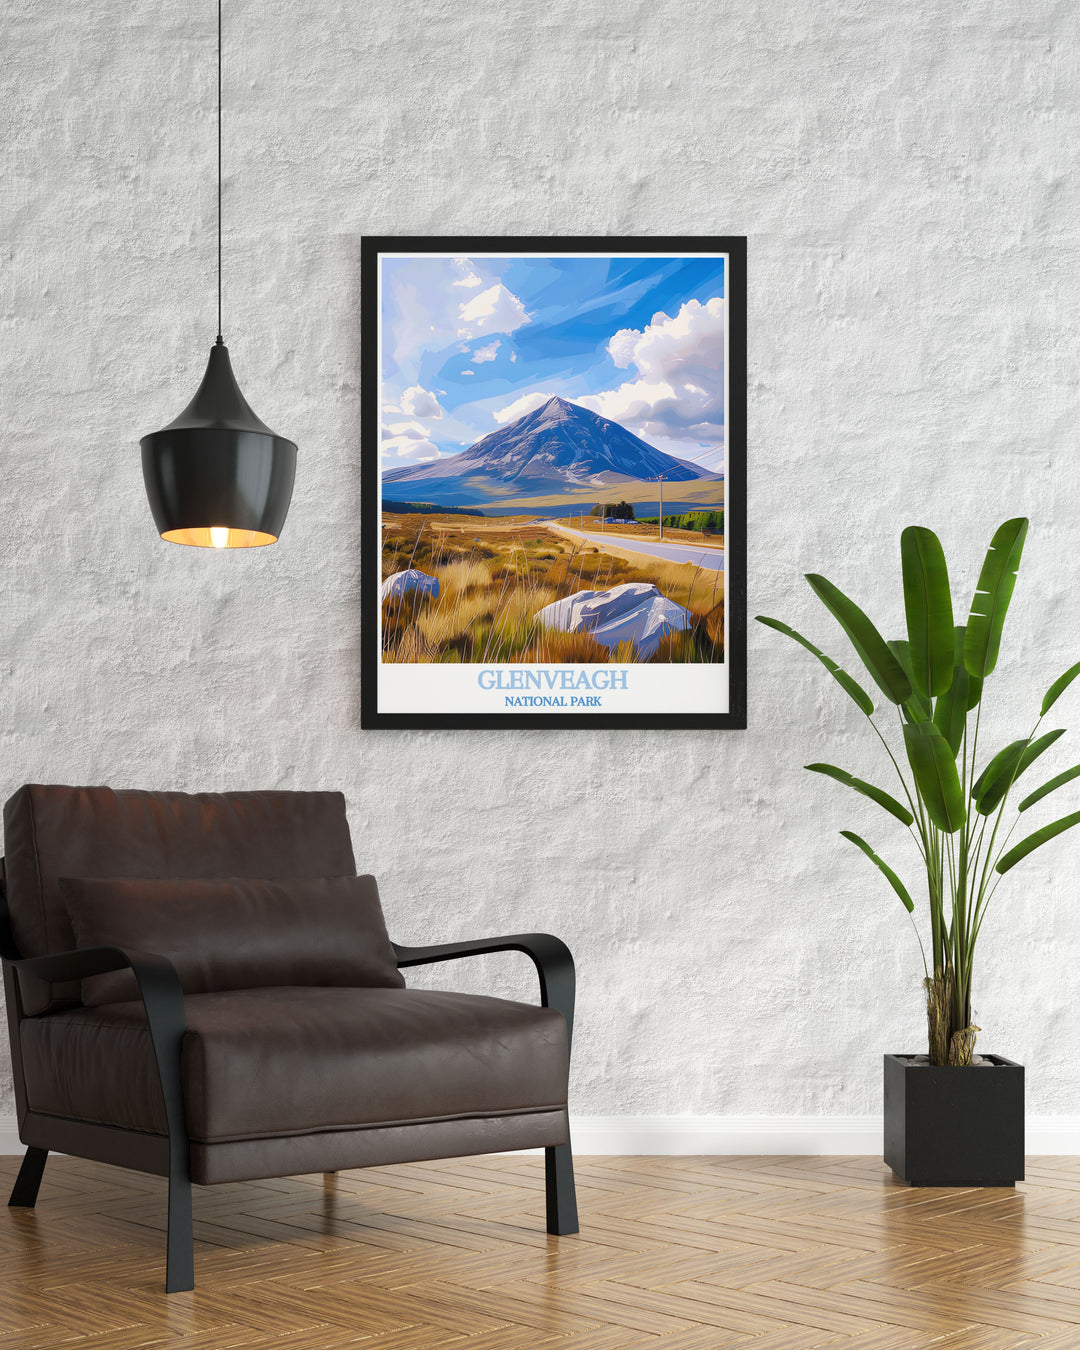 Modern wall decor of Glenveagh National Park, capturing the peaceful essence of Mount Errigal and the surrounding landscapes, perfect for bringing a piece of Irelands natural charm into your home.